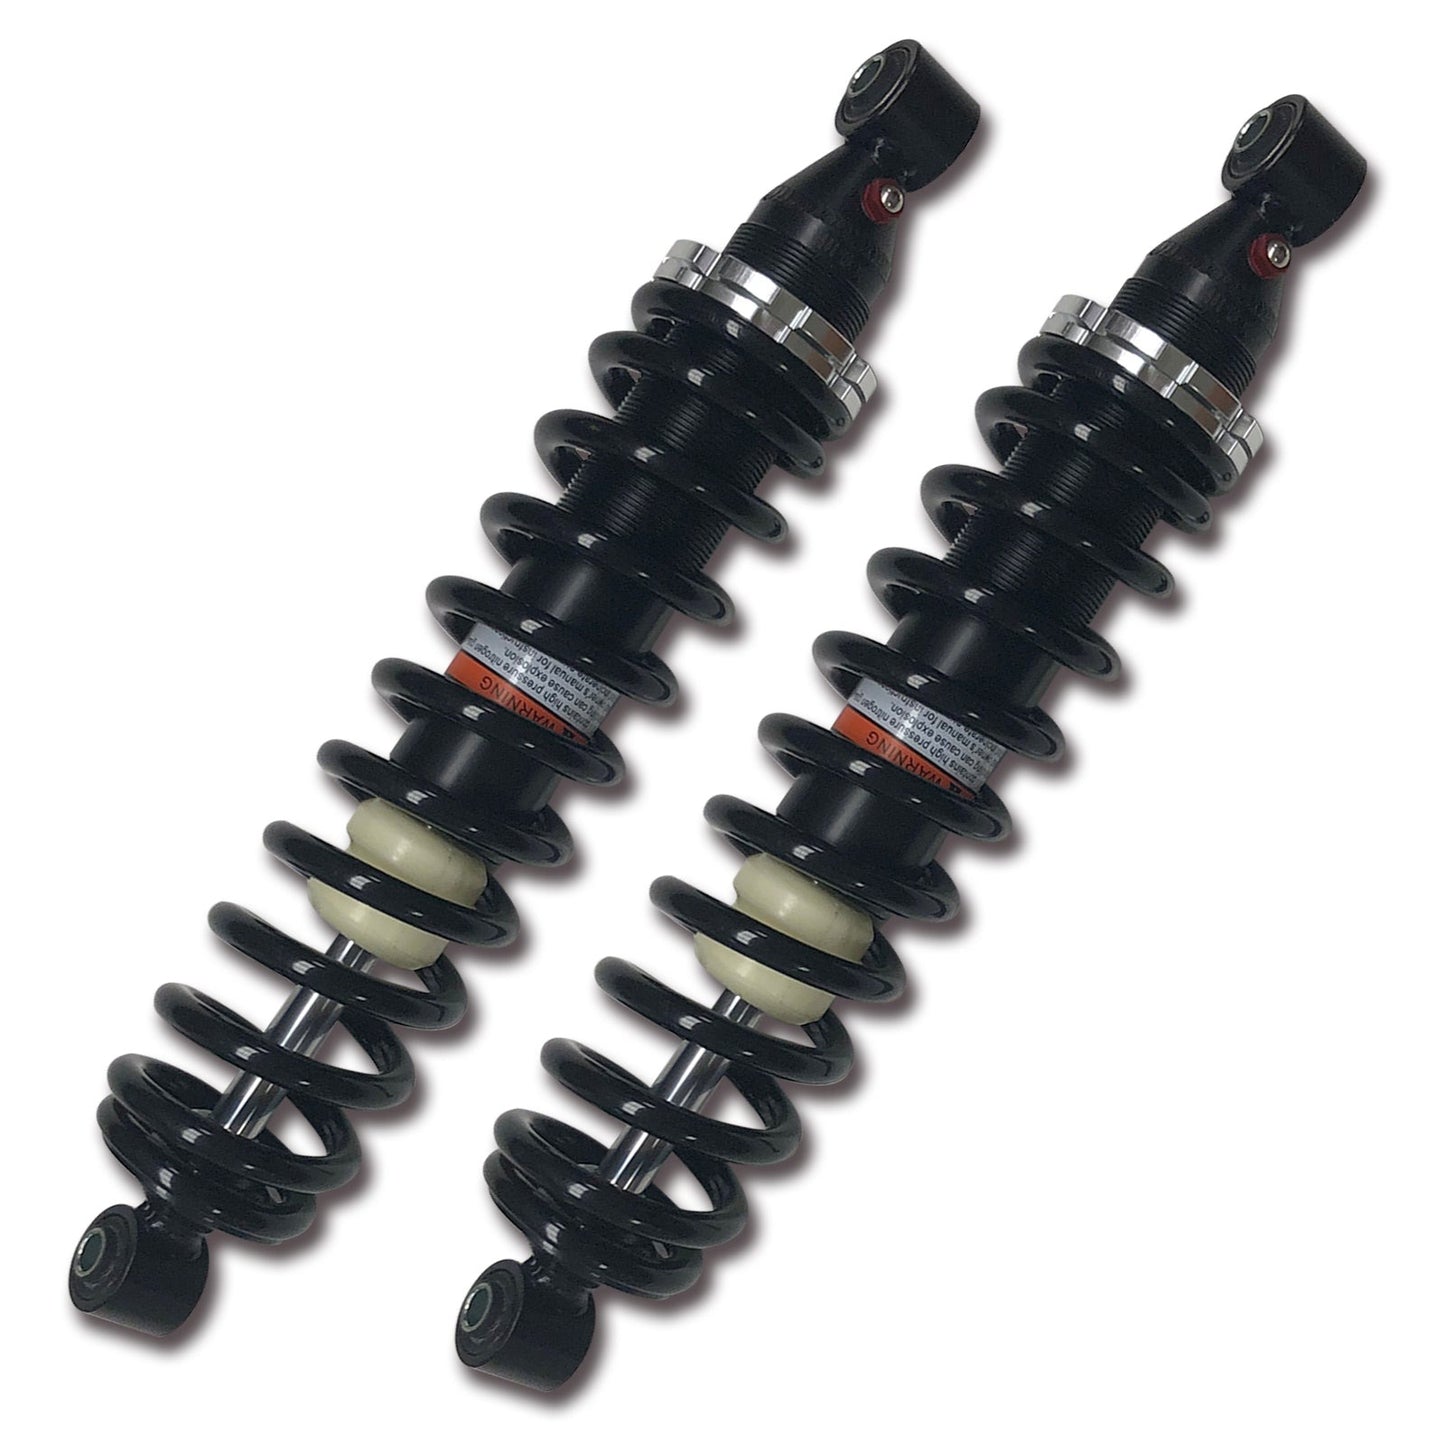 CAM-HO909 Caiman Shock Absorber ATV Rear Left Right Shock Absorber Replacement for 1993-2000 Honda Fourtrax 300 TRX 300FW Rear Shock